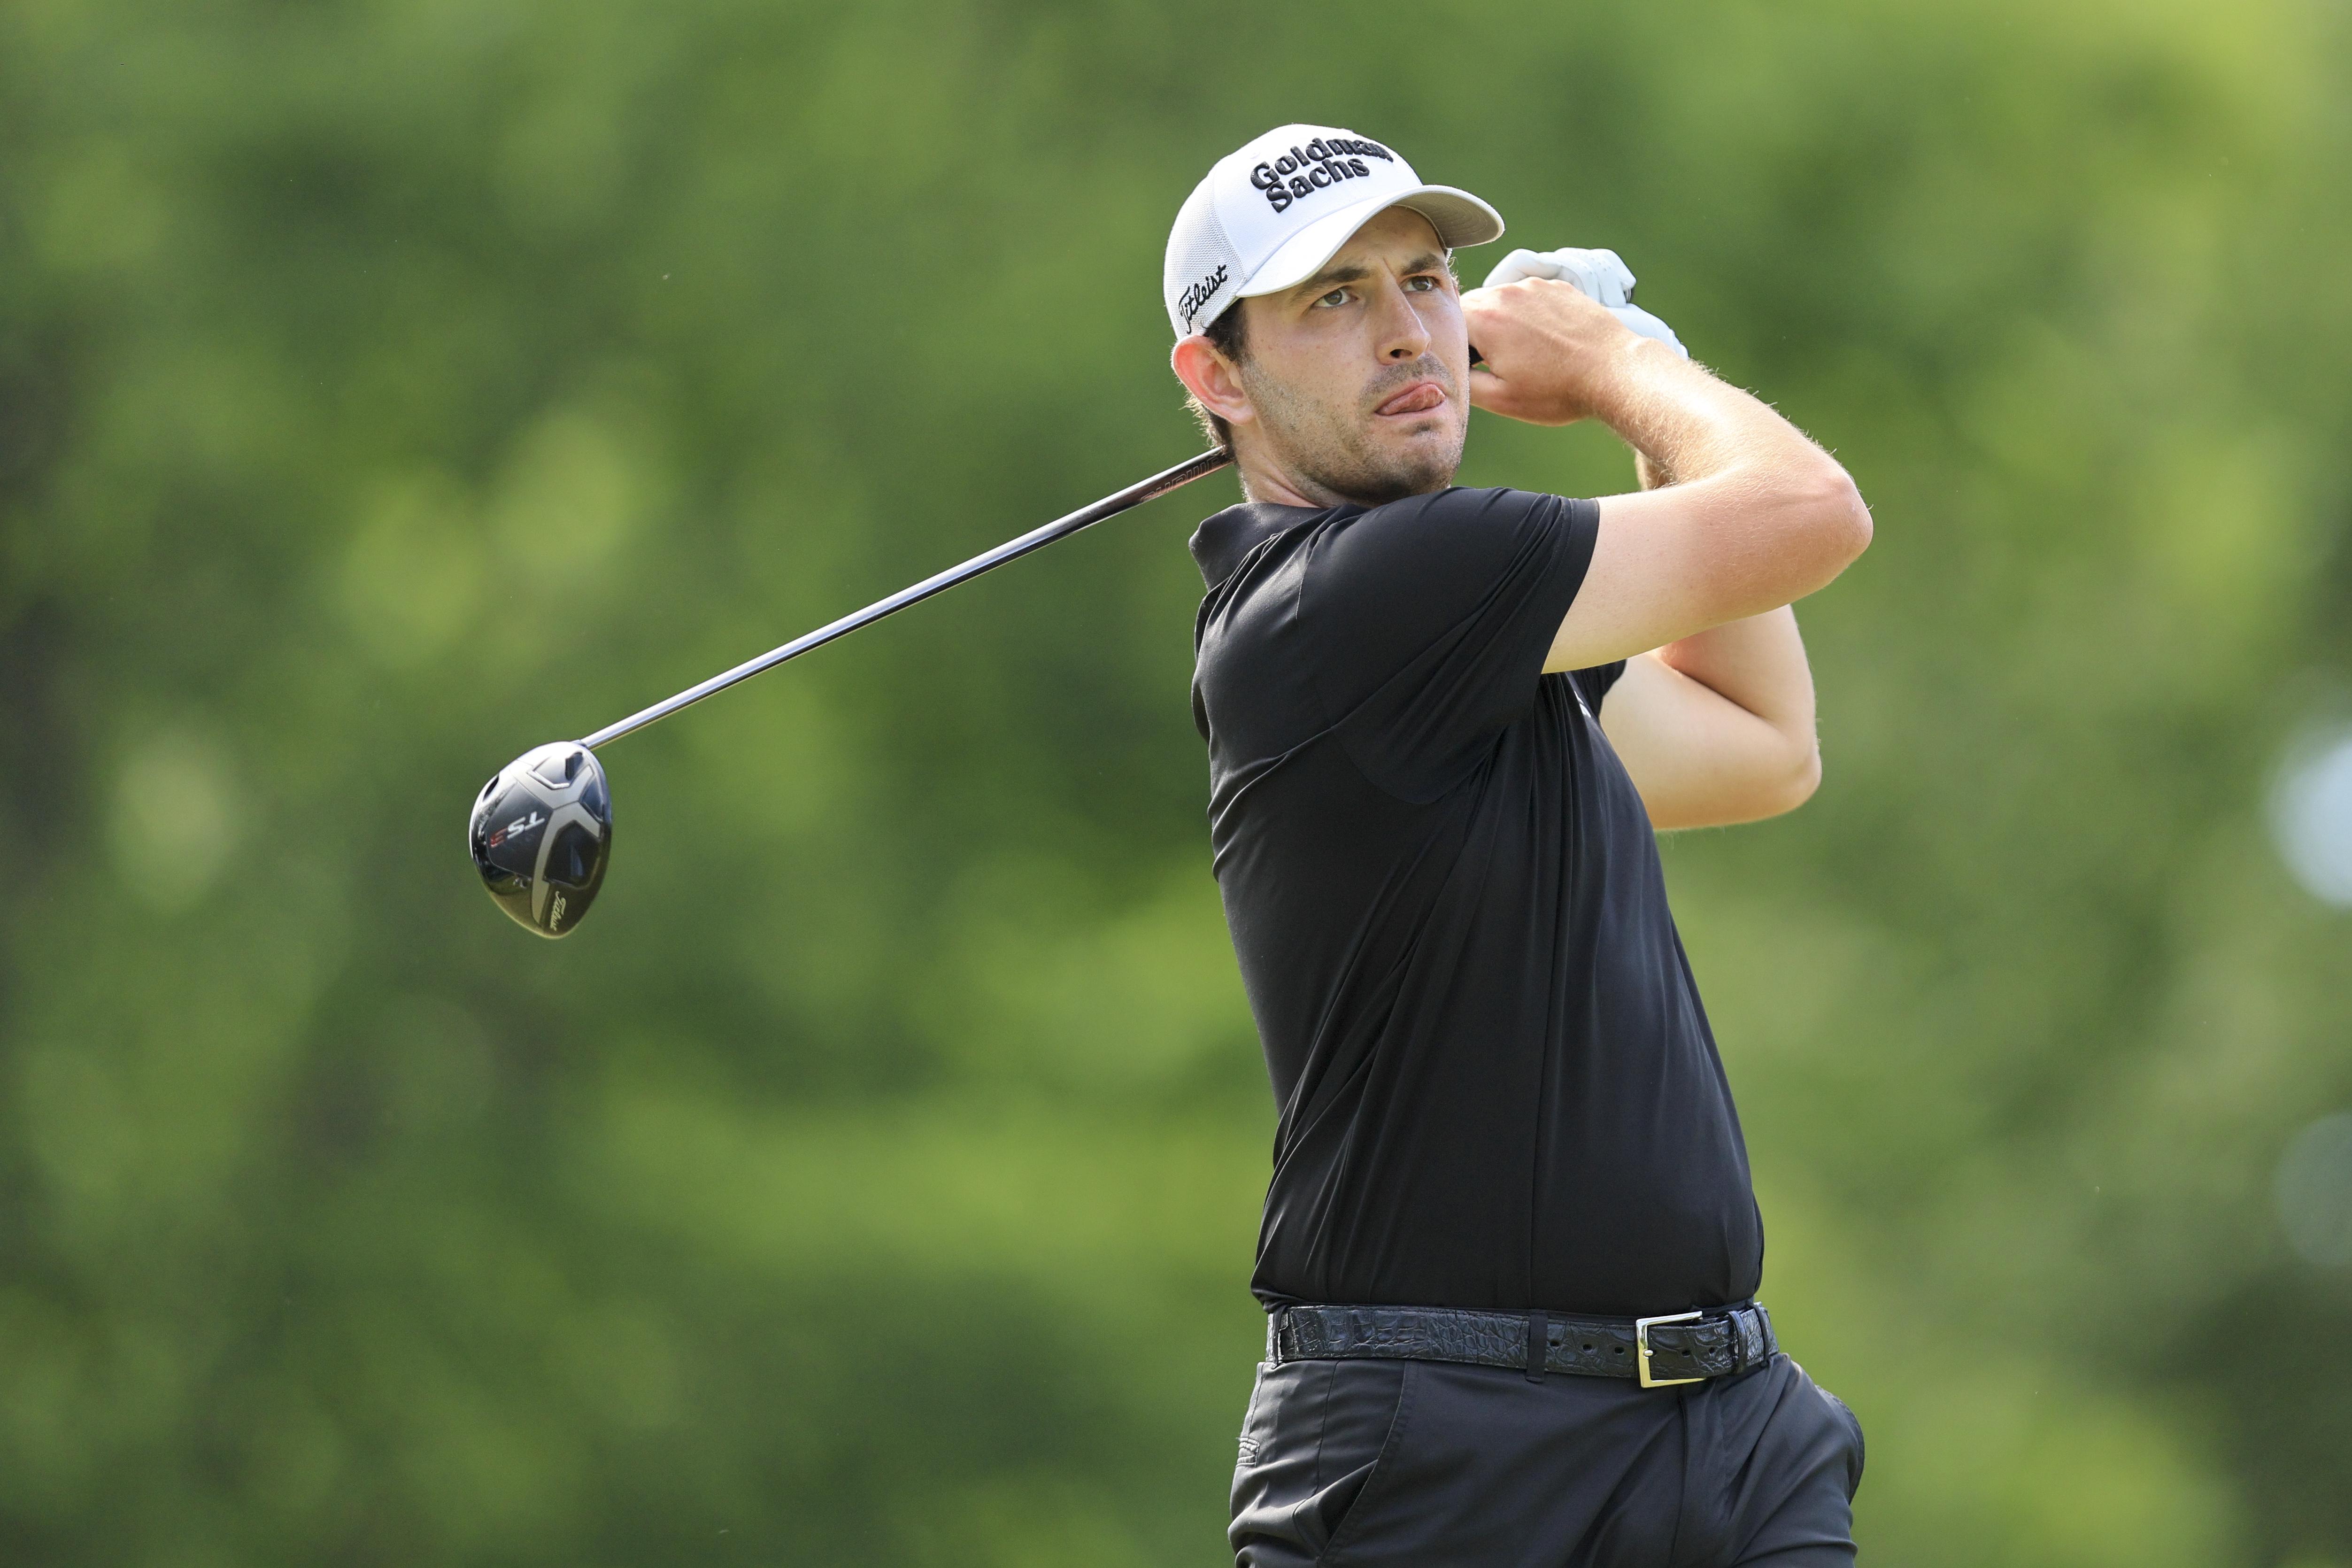 Patrick Cantlay U.S. Open 2022 Odds, History & Predictions